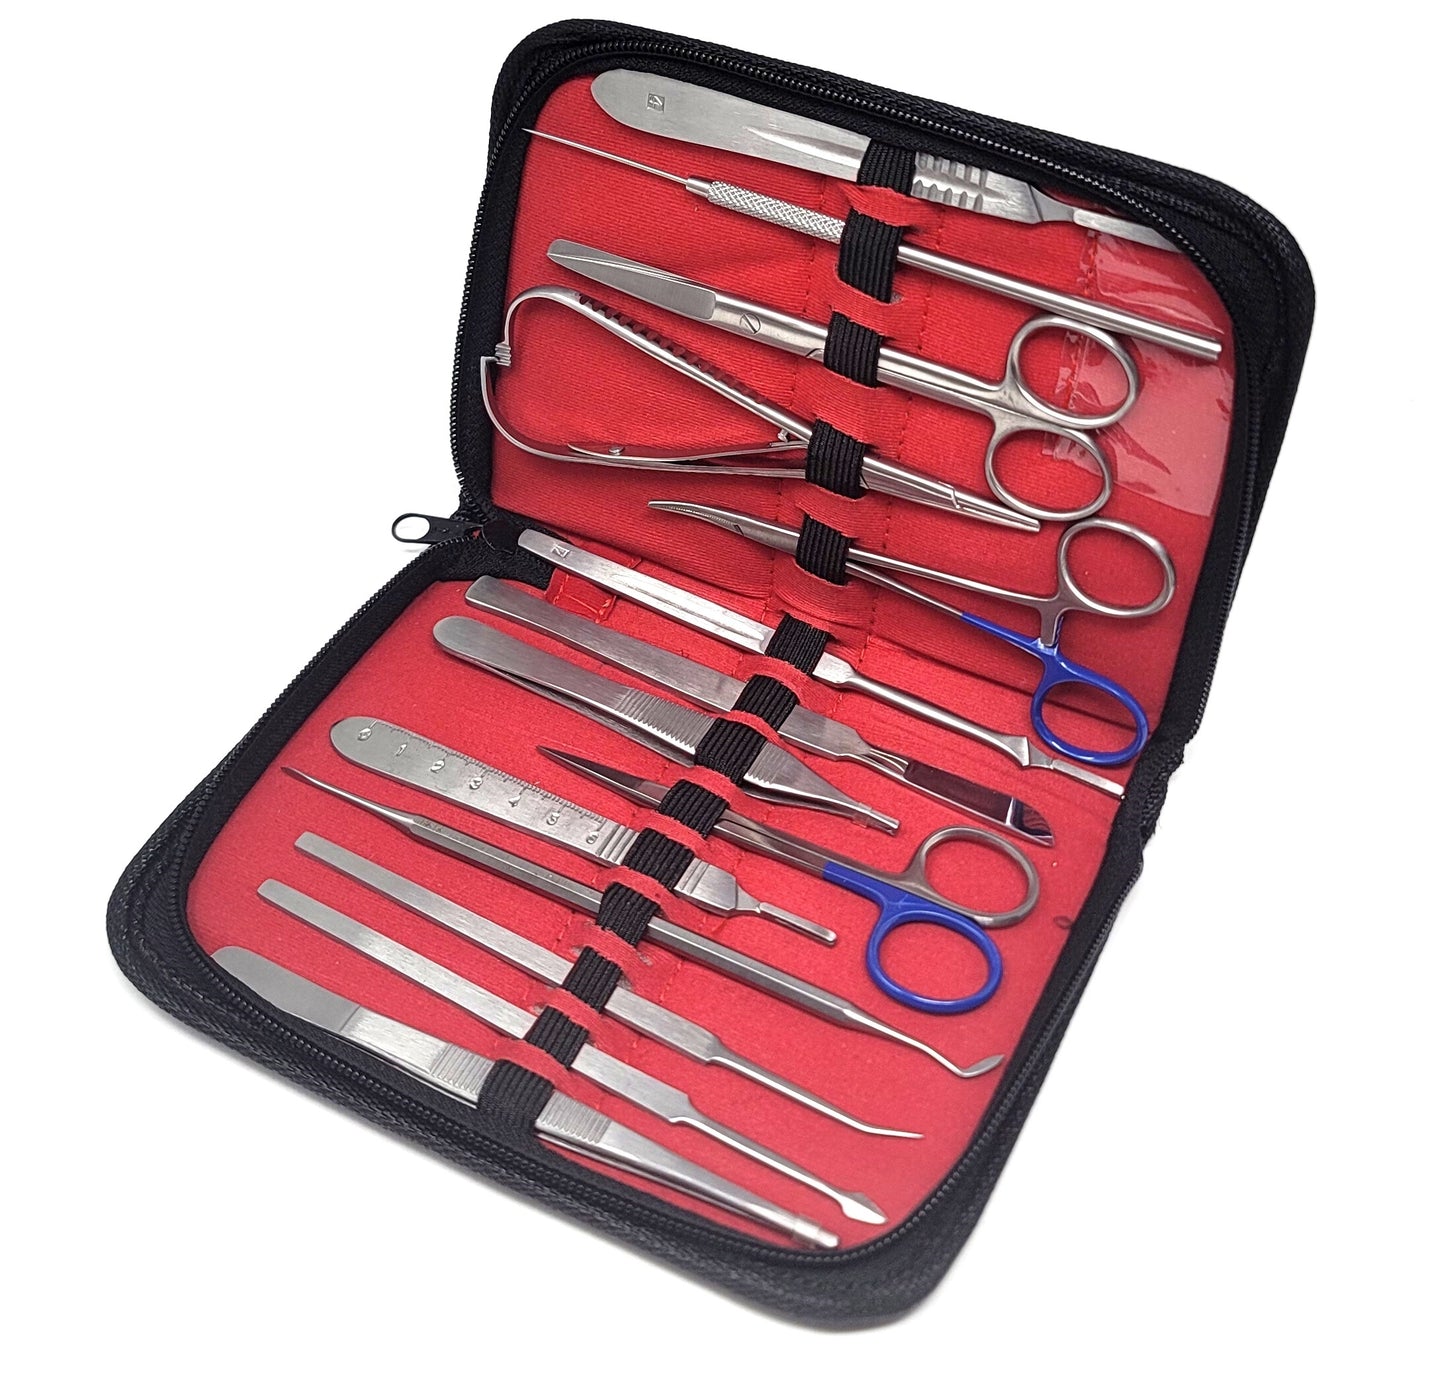 45 Pcs Dissecting Kit Suitable for University Level Anatomy with Blades